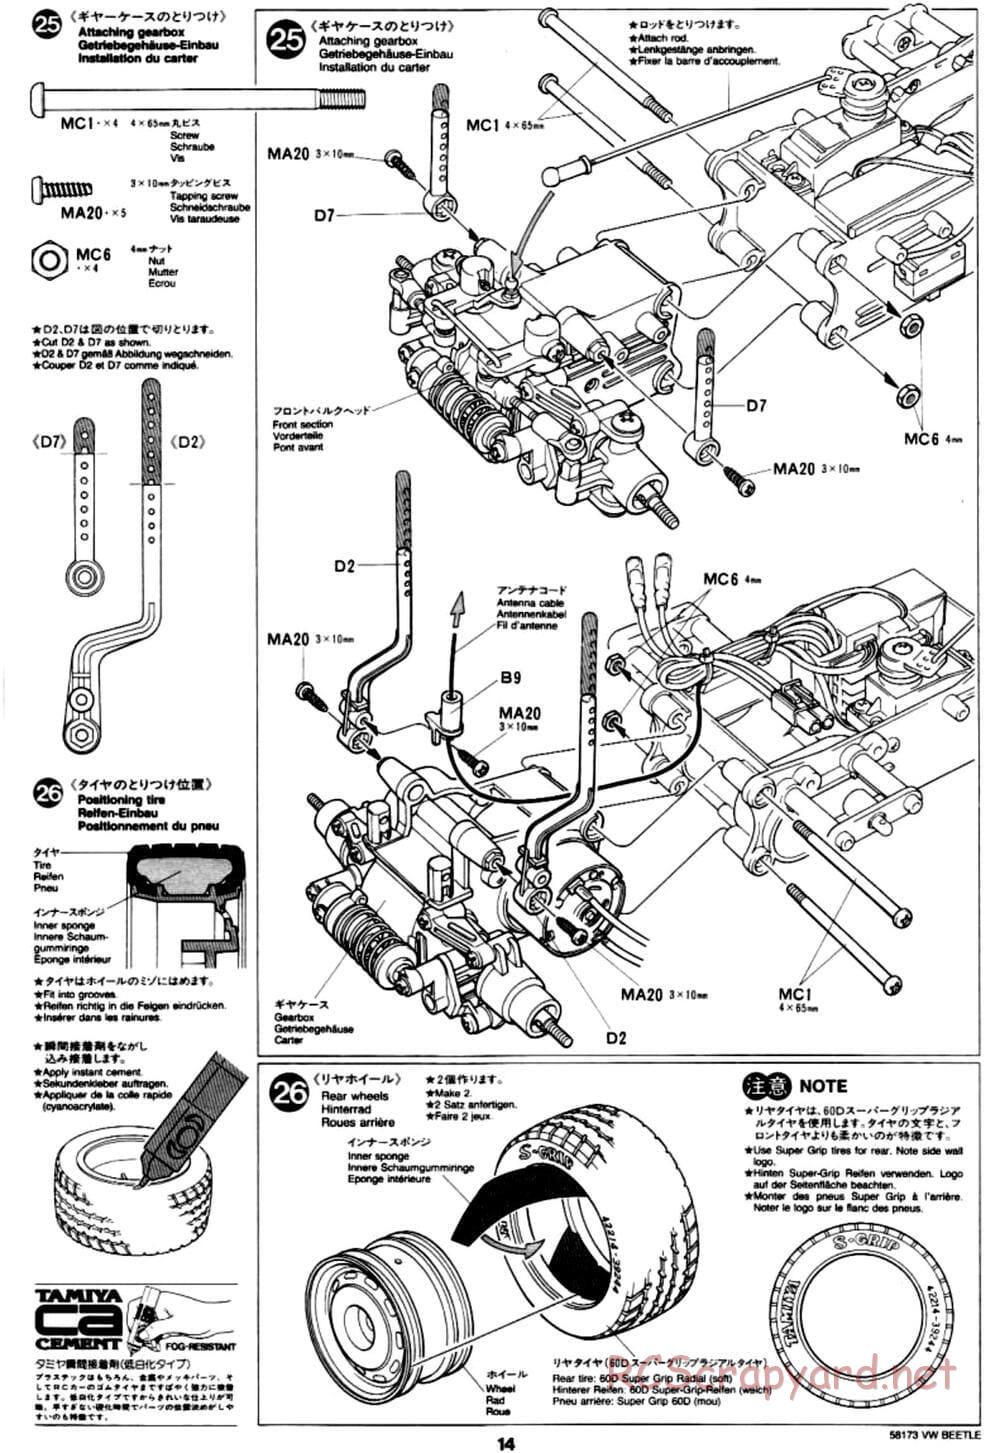 Tamiya - Volkswagen Beetle - M02L Chassis - Manual - Page 14